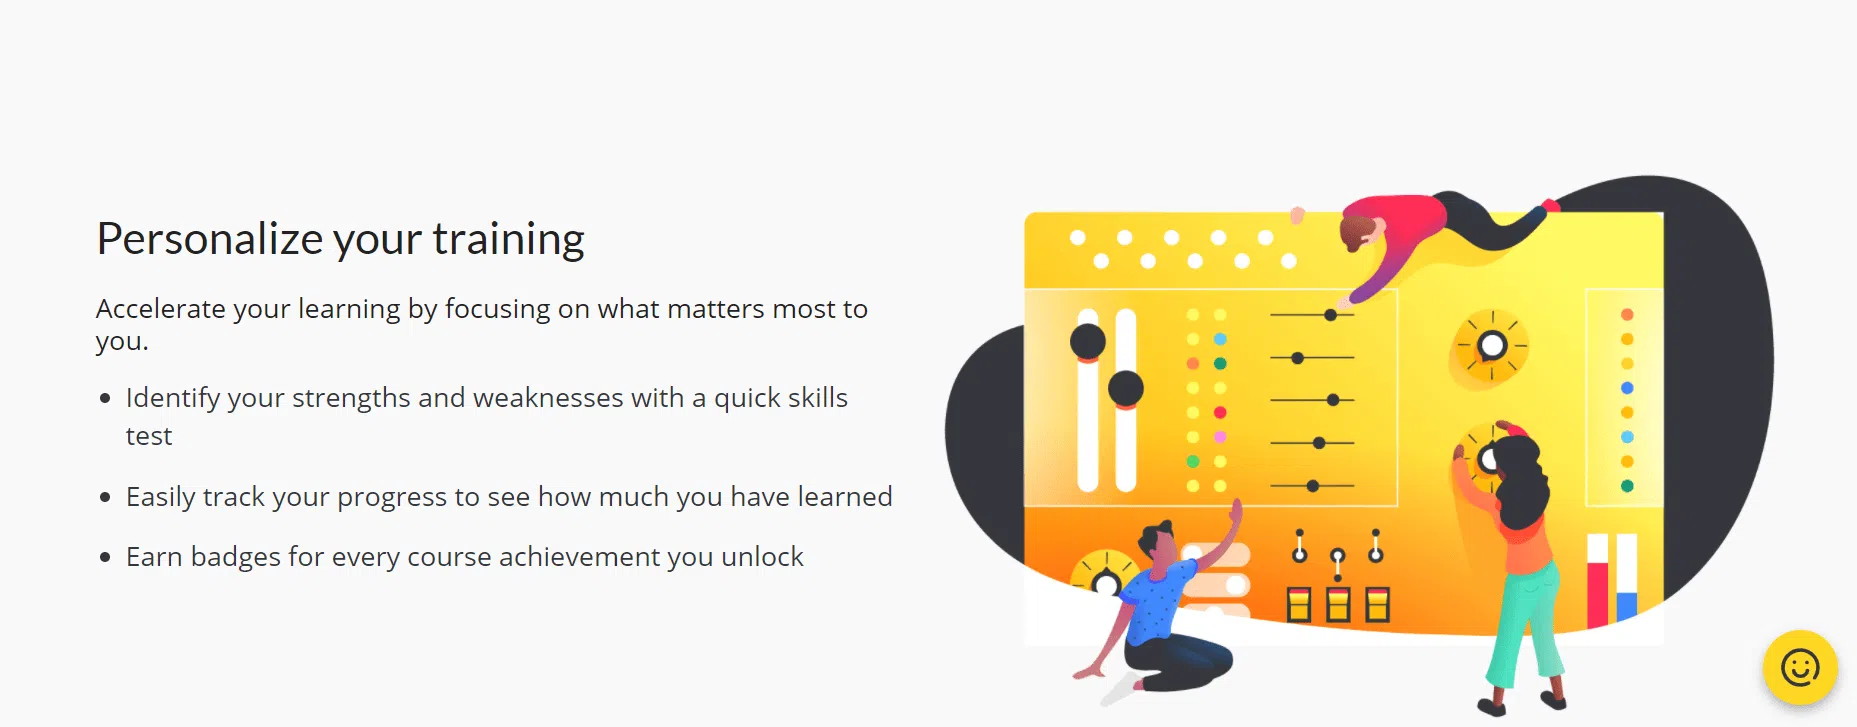 Goskills Review personlise your training